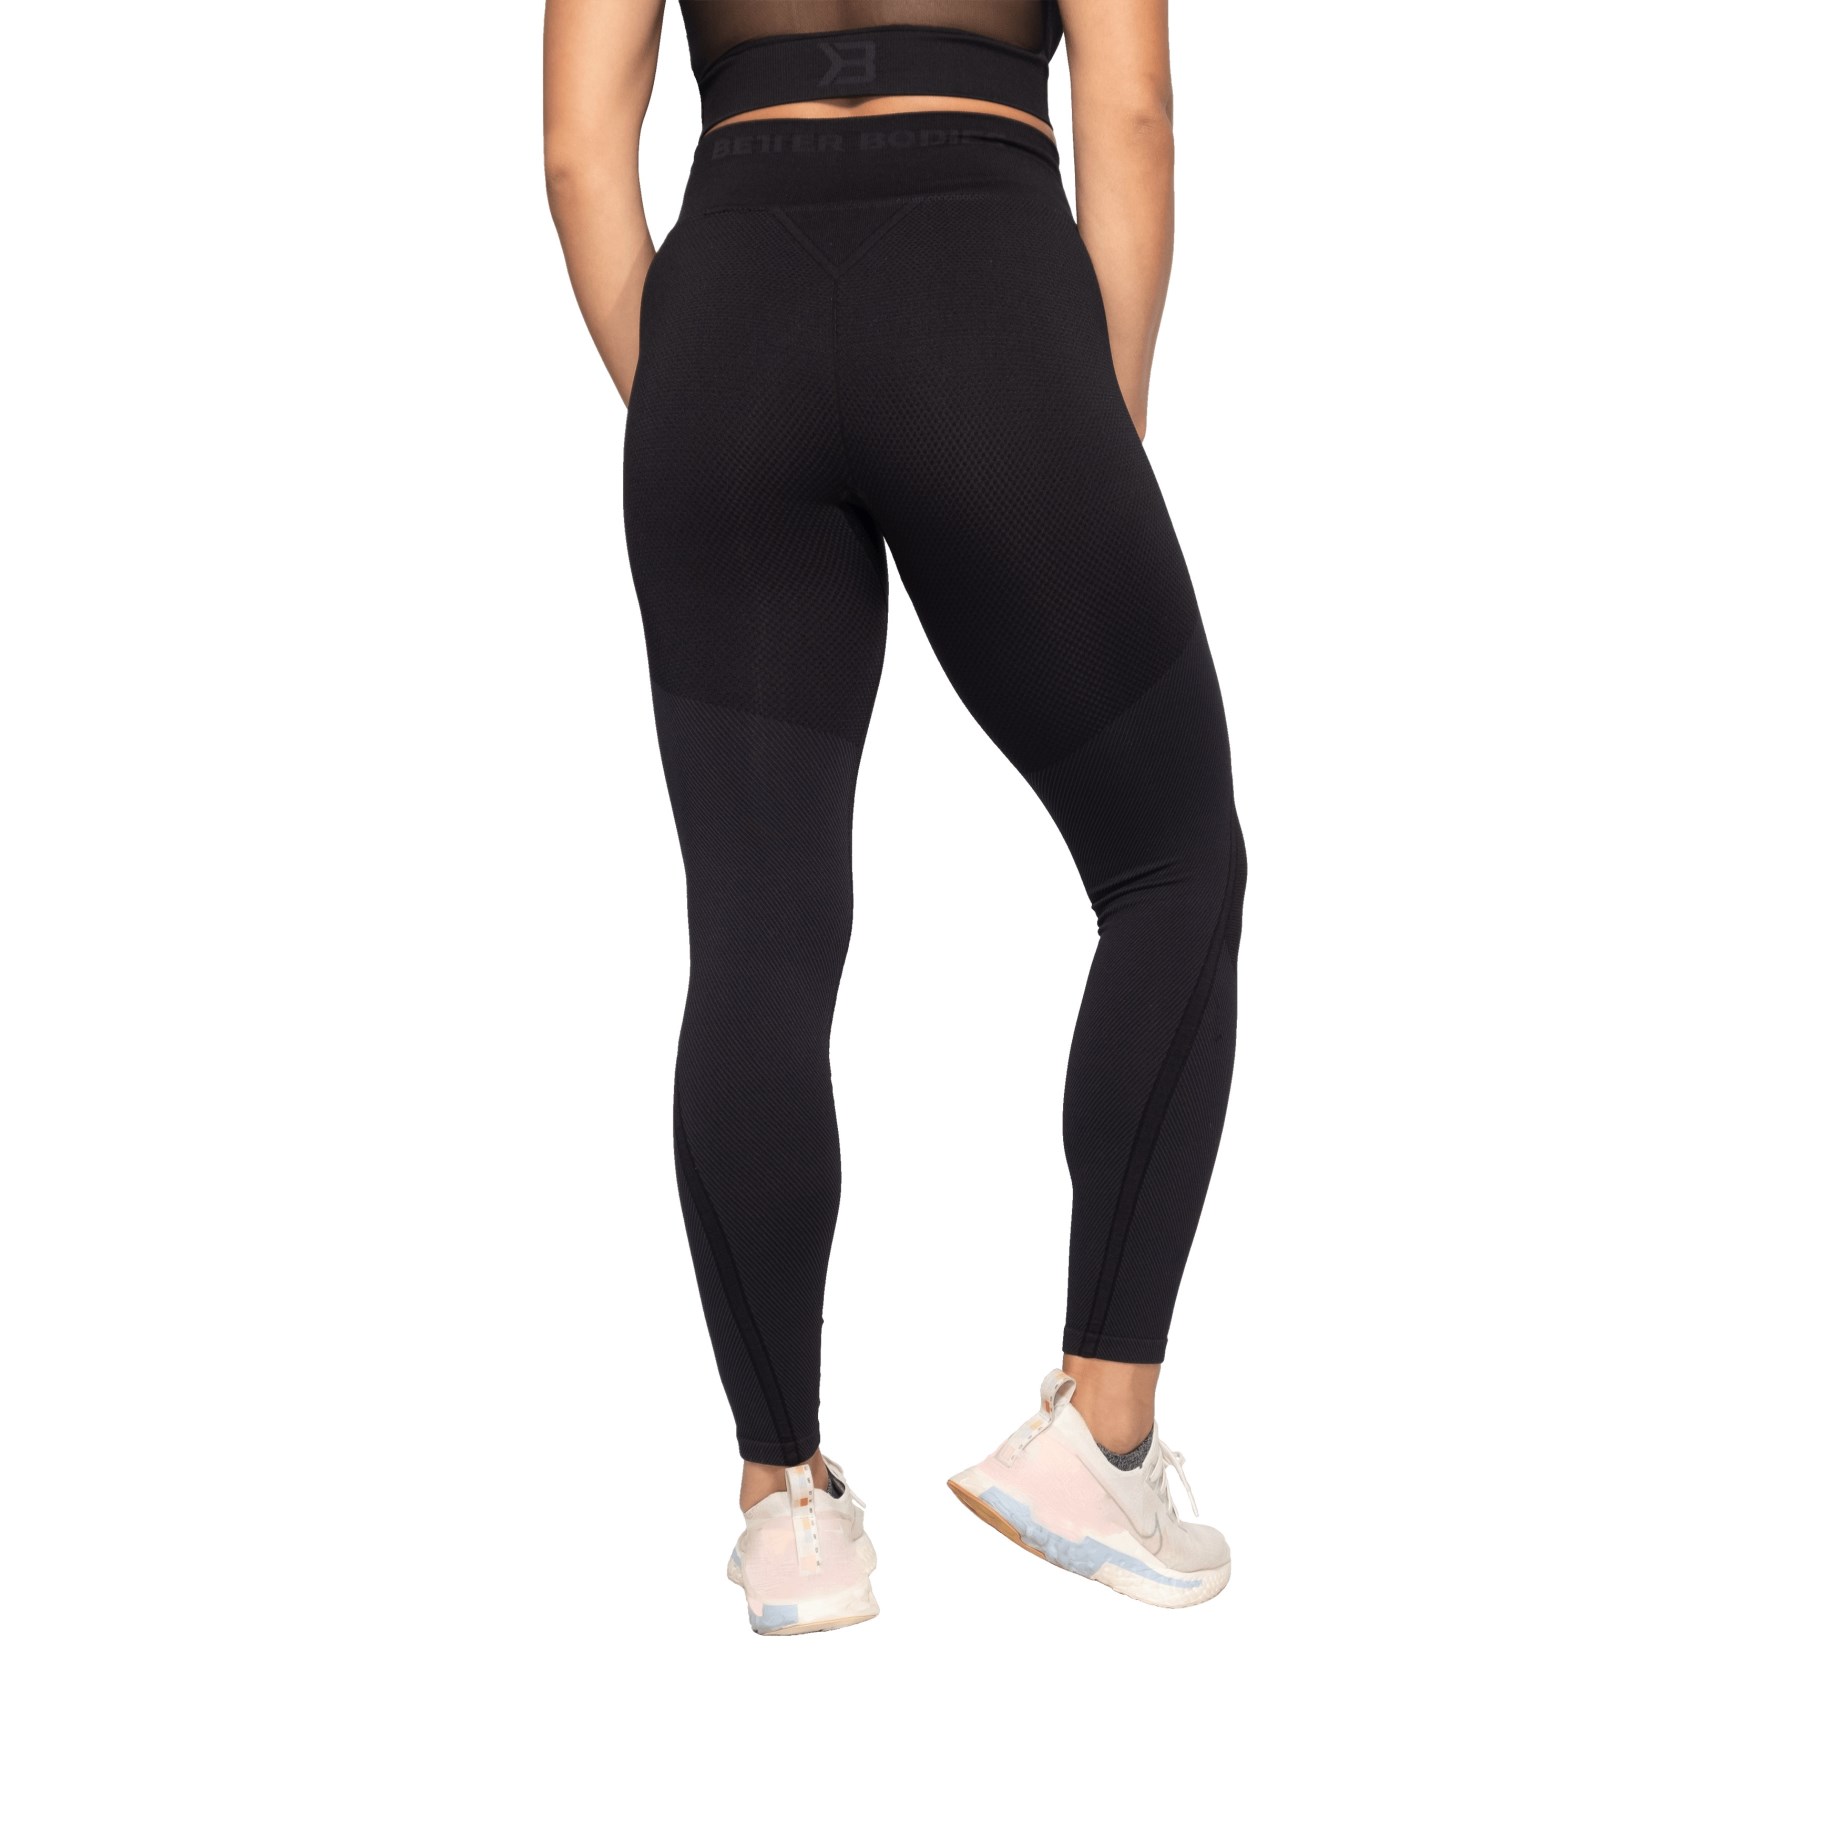 Leggings Outlet In Chennai India